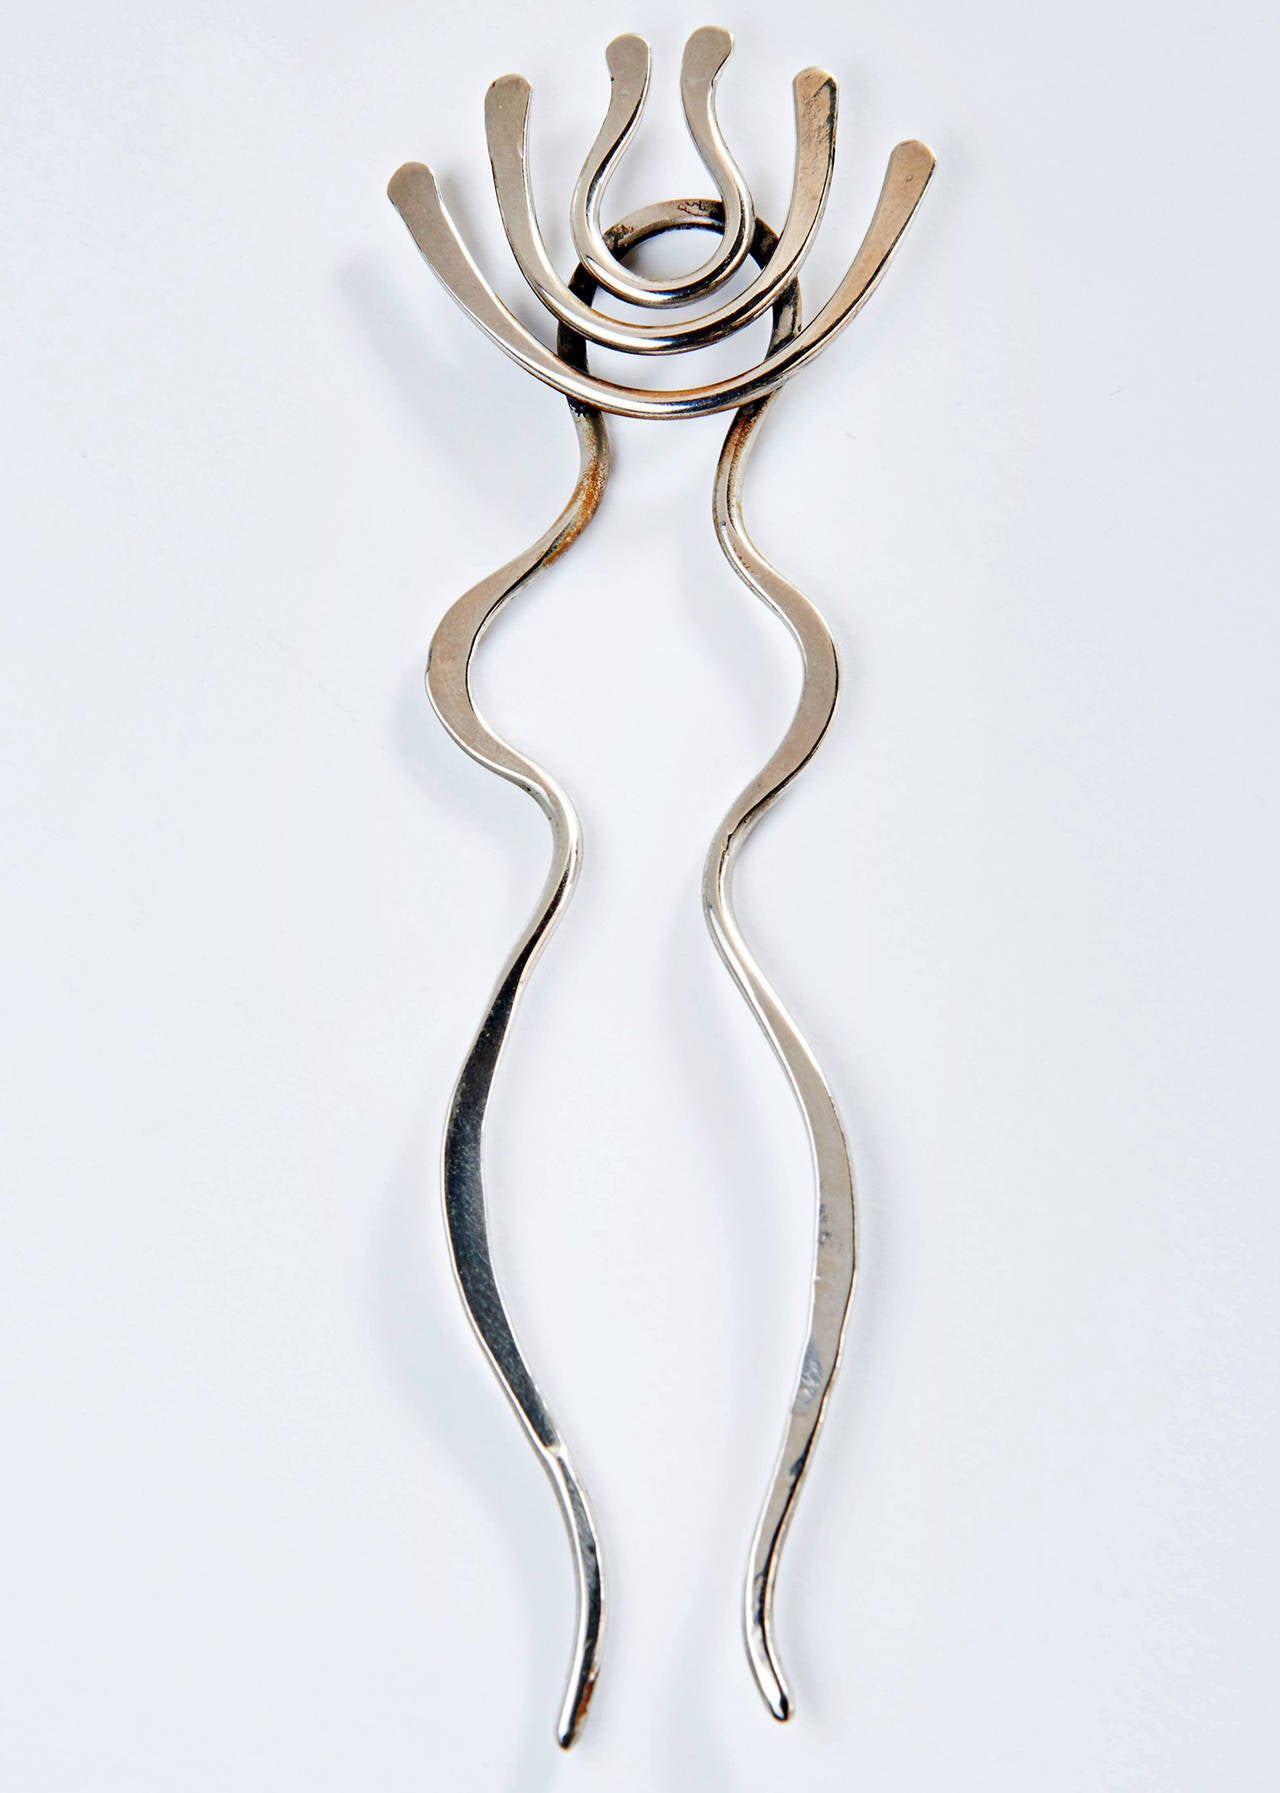 Mid-20th Century Sterling Silver Hair Comb Sculpture by Art Smith